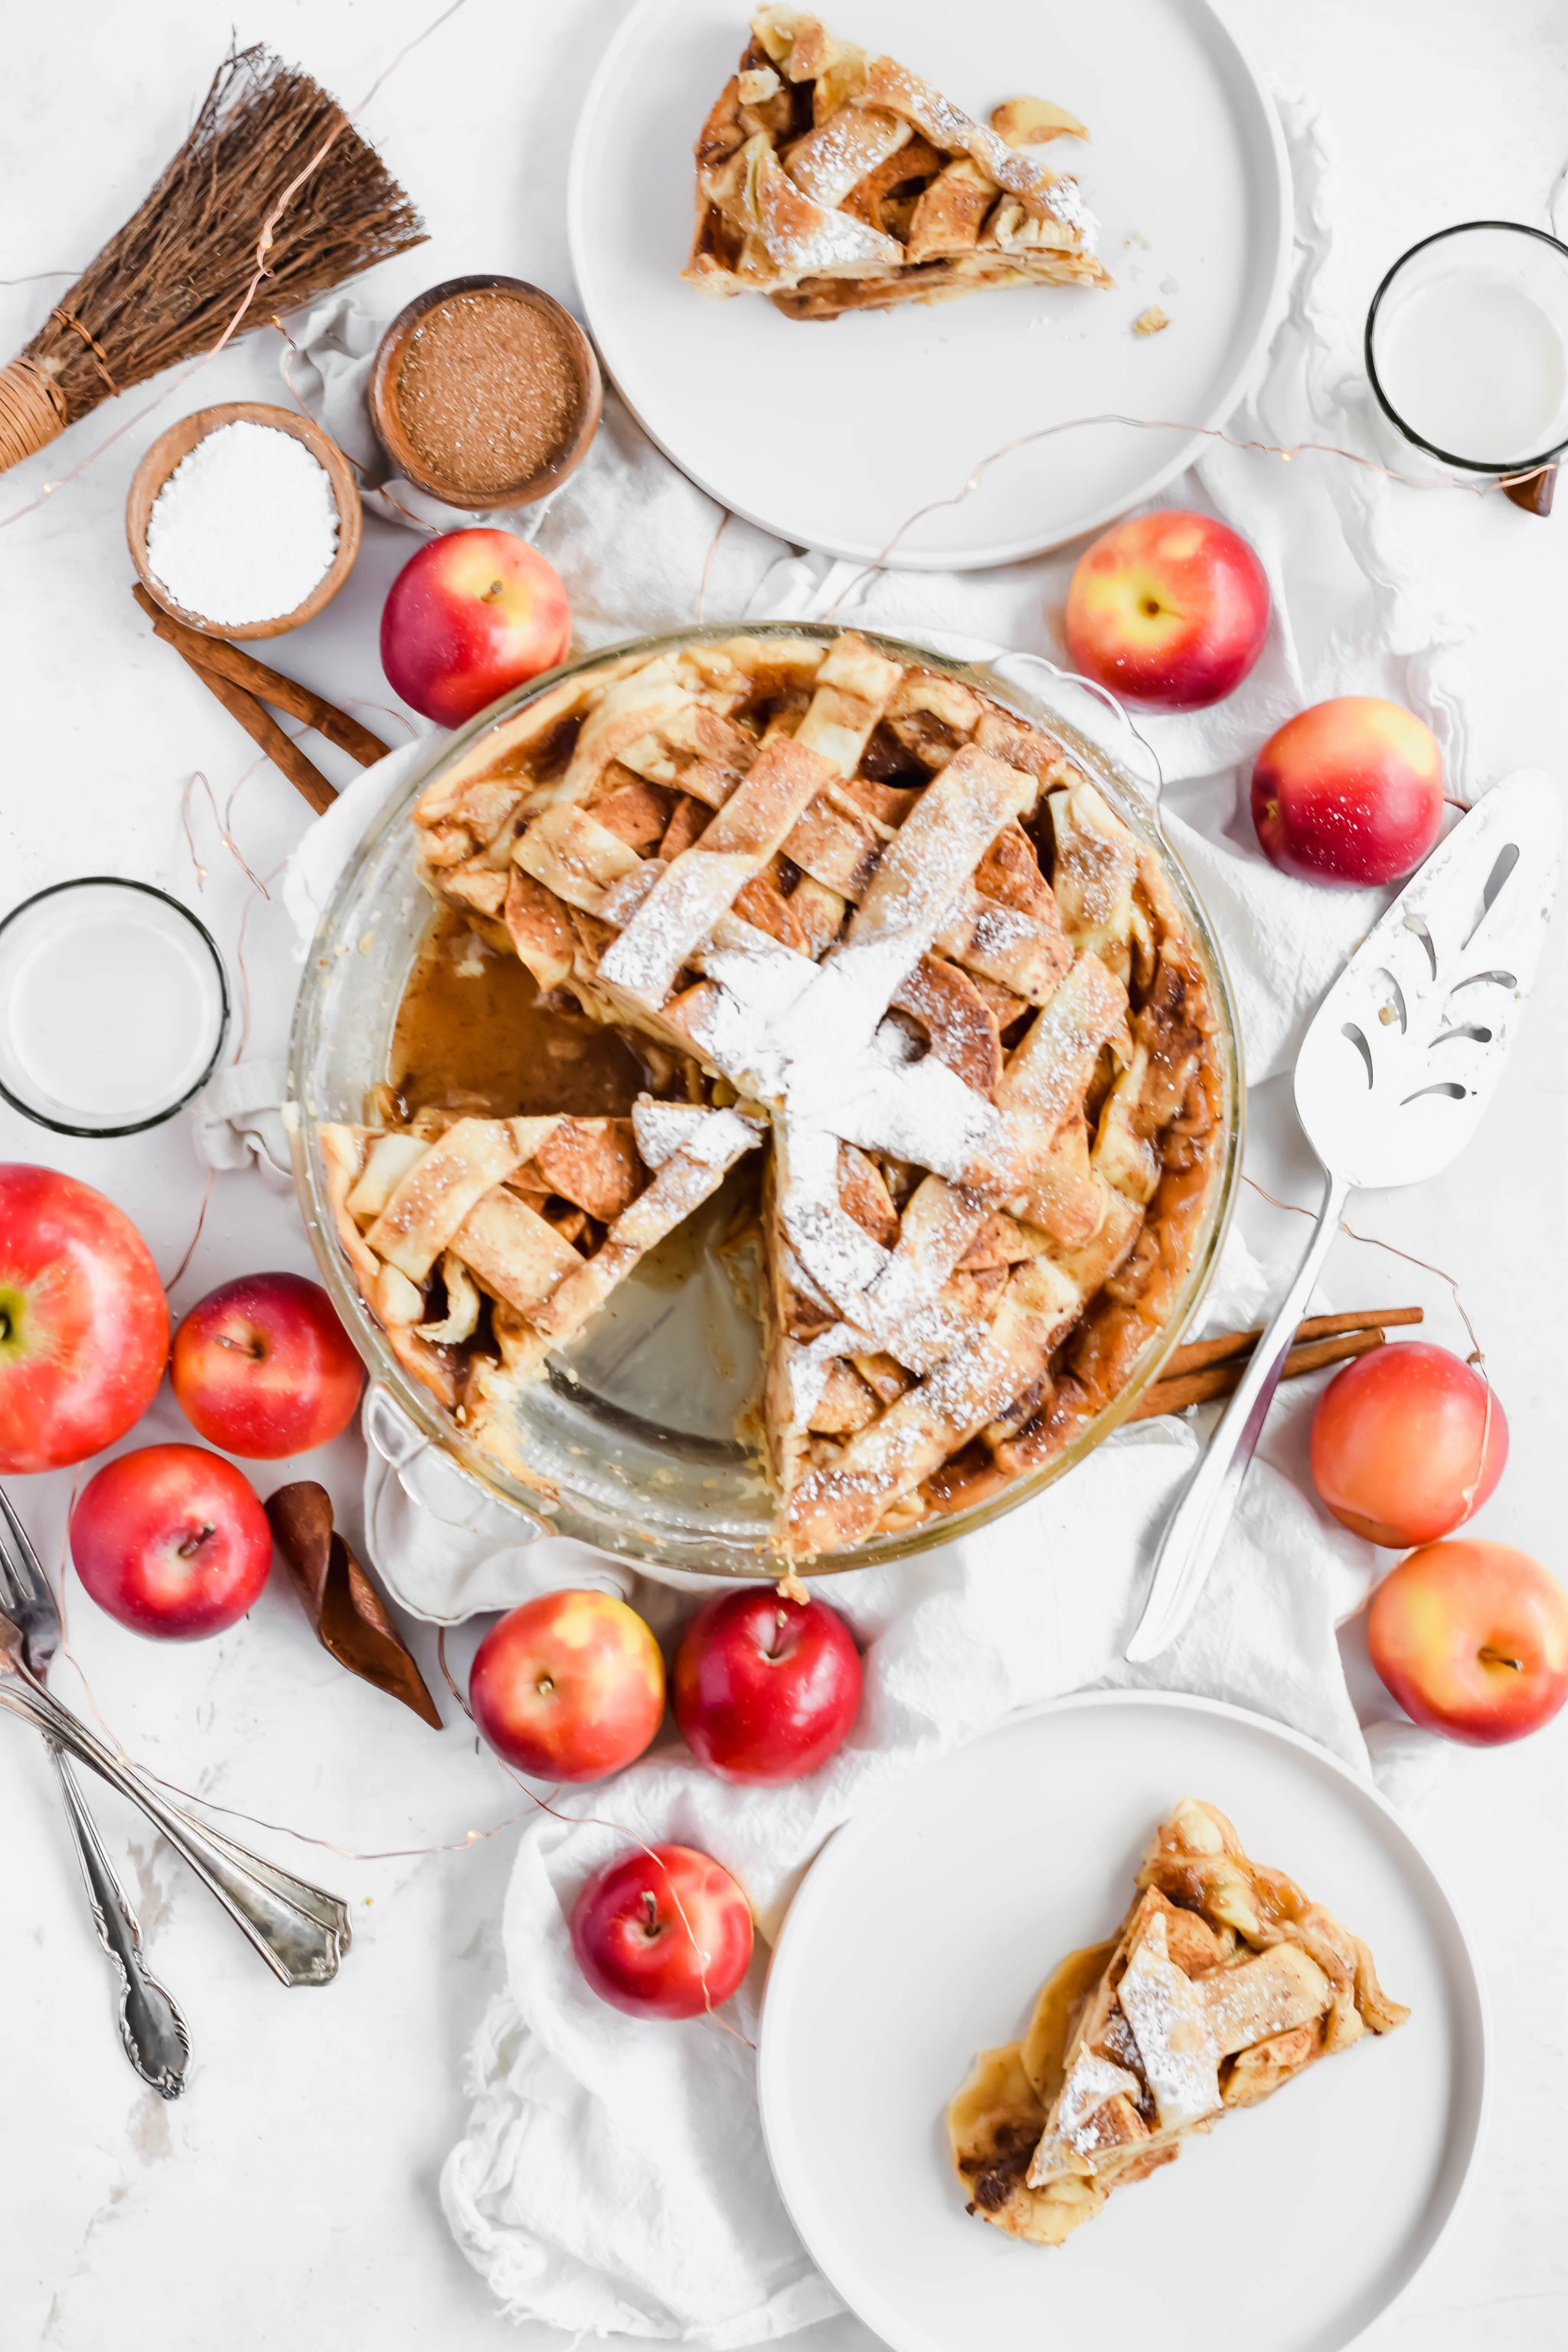 Overhead view of a simple apple pie with two slices removed and put on plates surrounded by pie ingredients